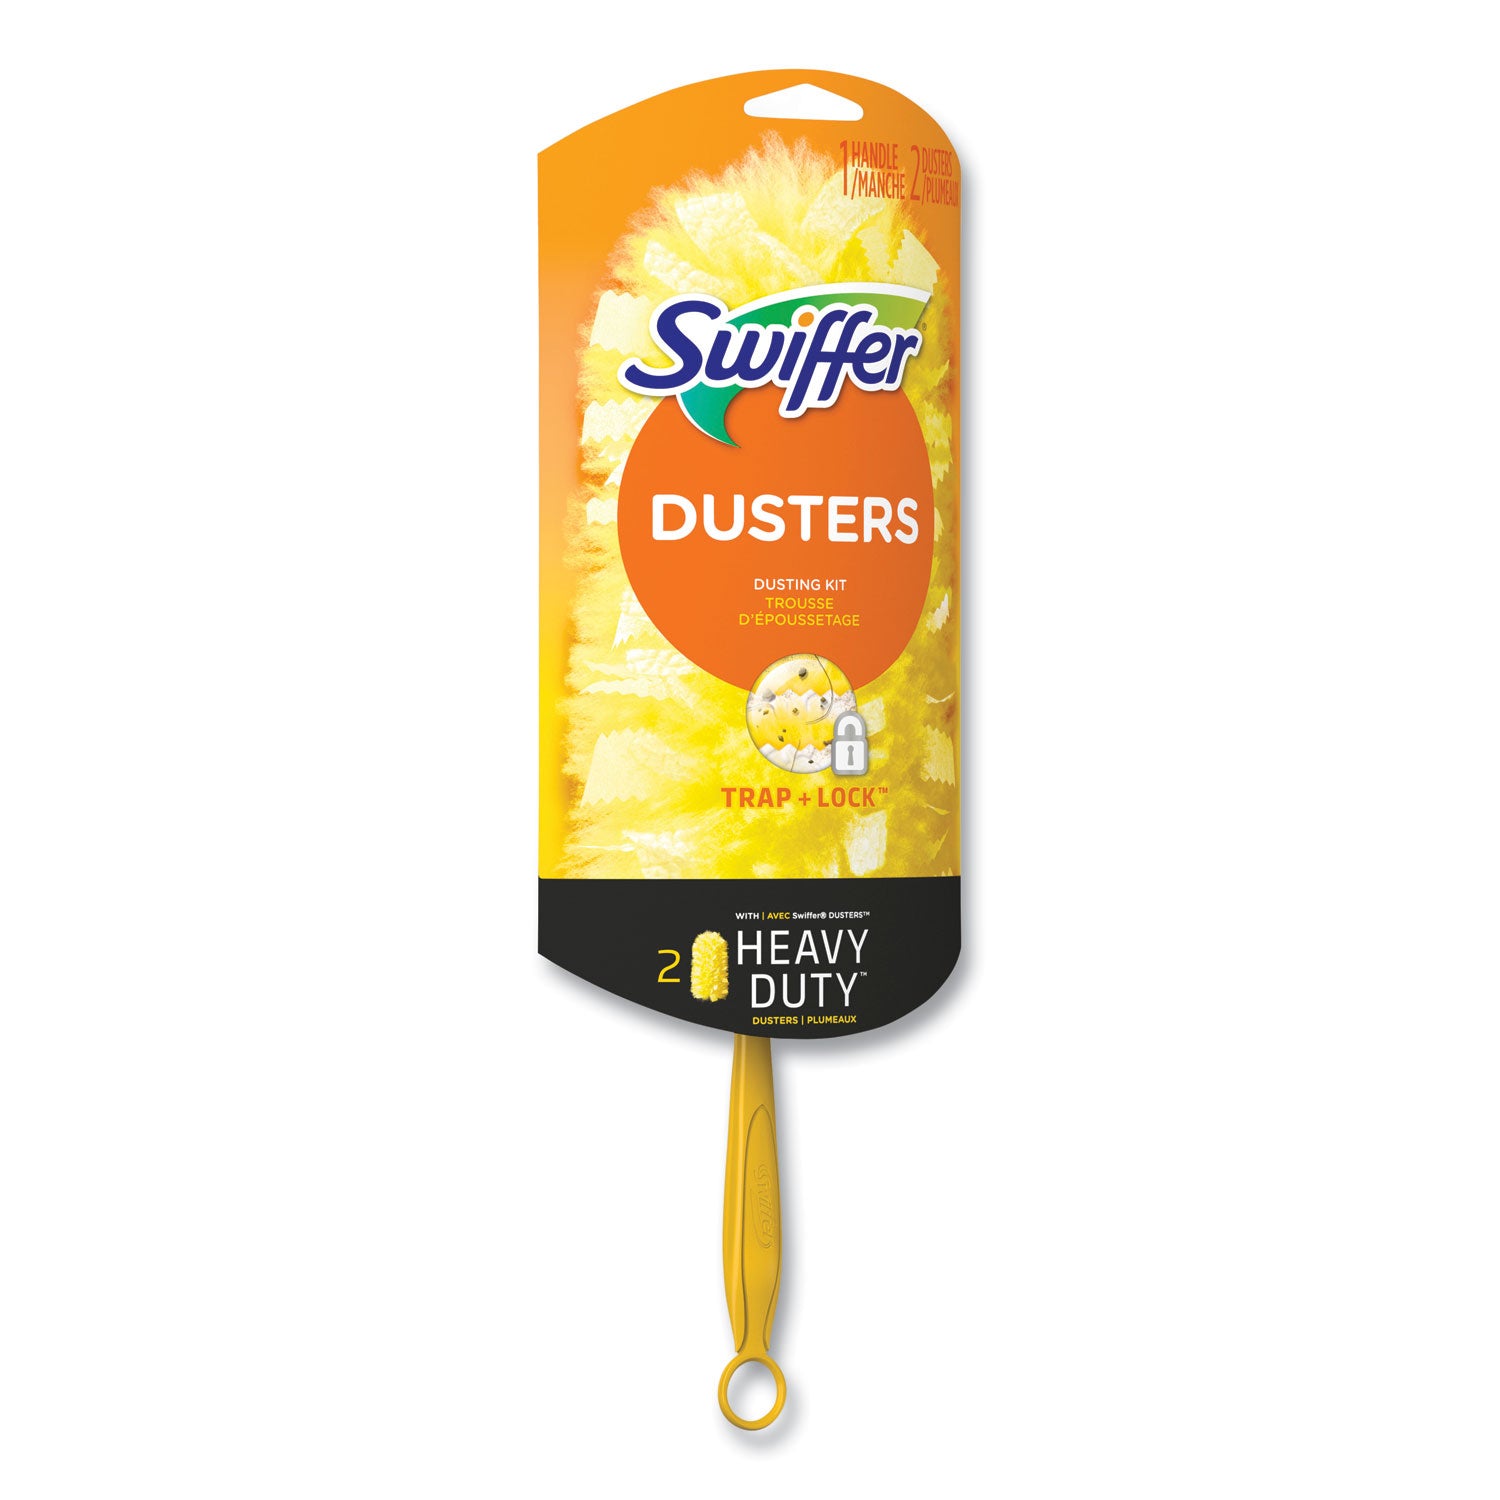 heavy-duty-dusters-starter-kit-6-handle-with-two-disposable-dusters-4-kits-carton_pgc08109 - 2